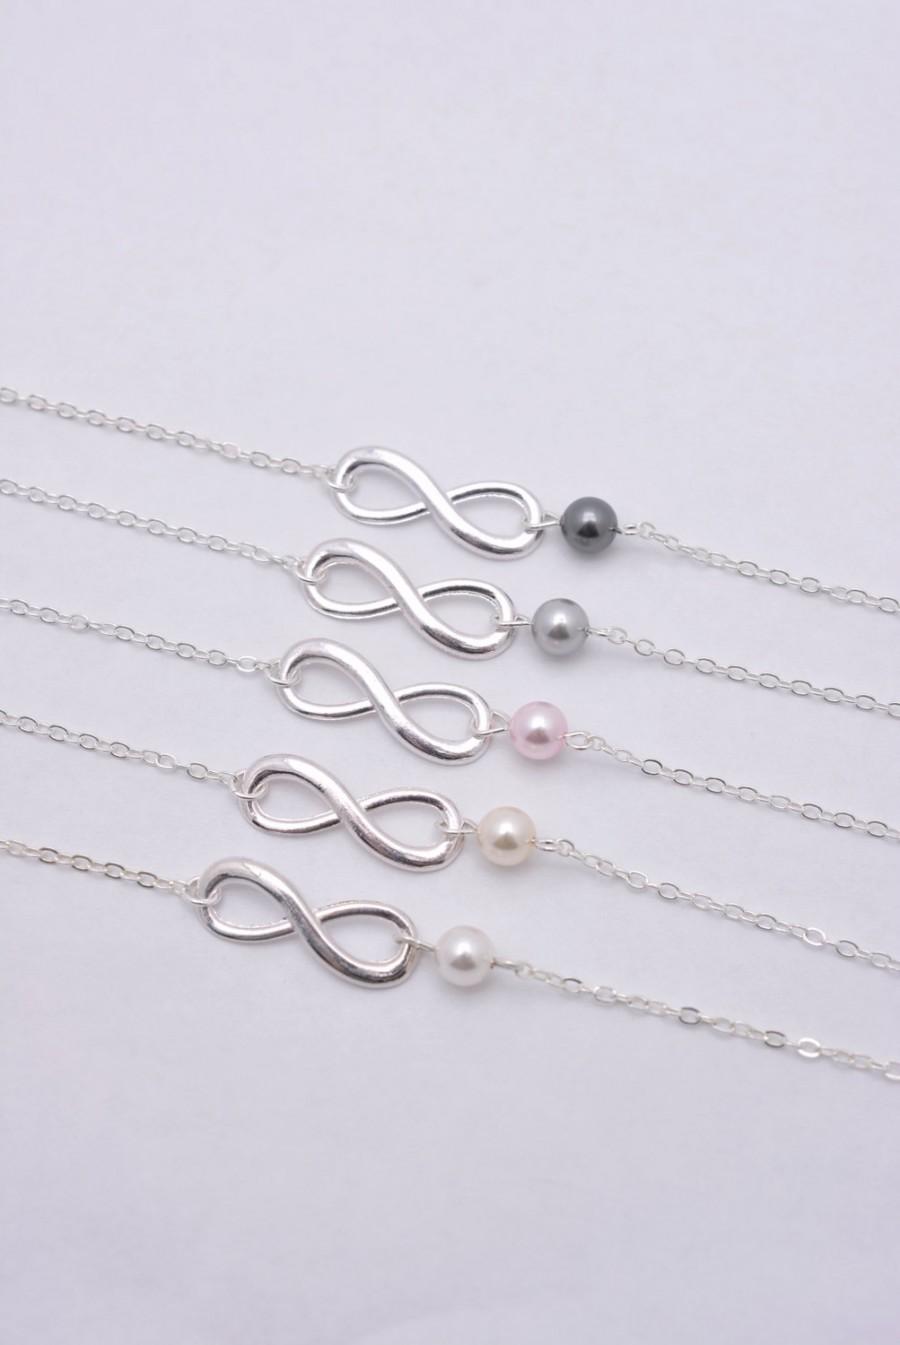 Mariage - Set of 4 Bridesmaid Infinity Bracelets, Infinity Pearl Bracelets, 4 Infinity and Pearl Bracelets - Sterling Silver Chain 0217